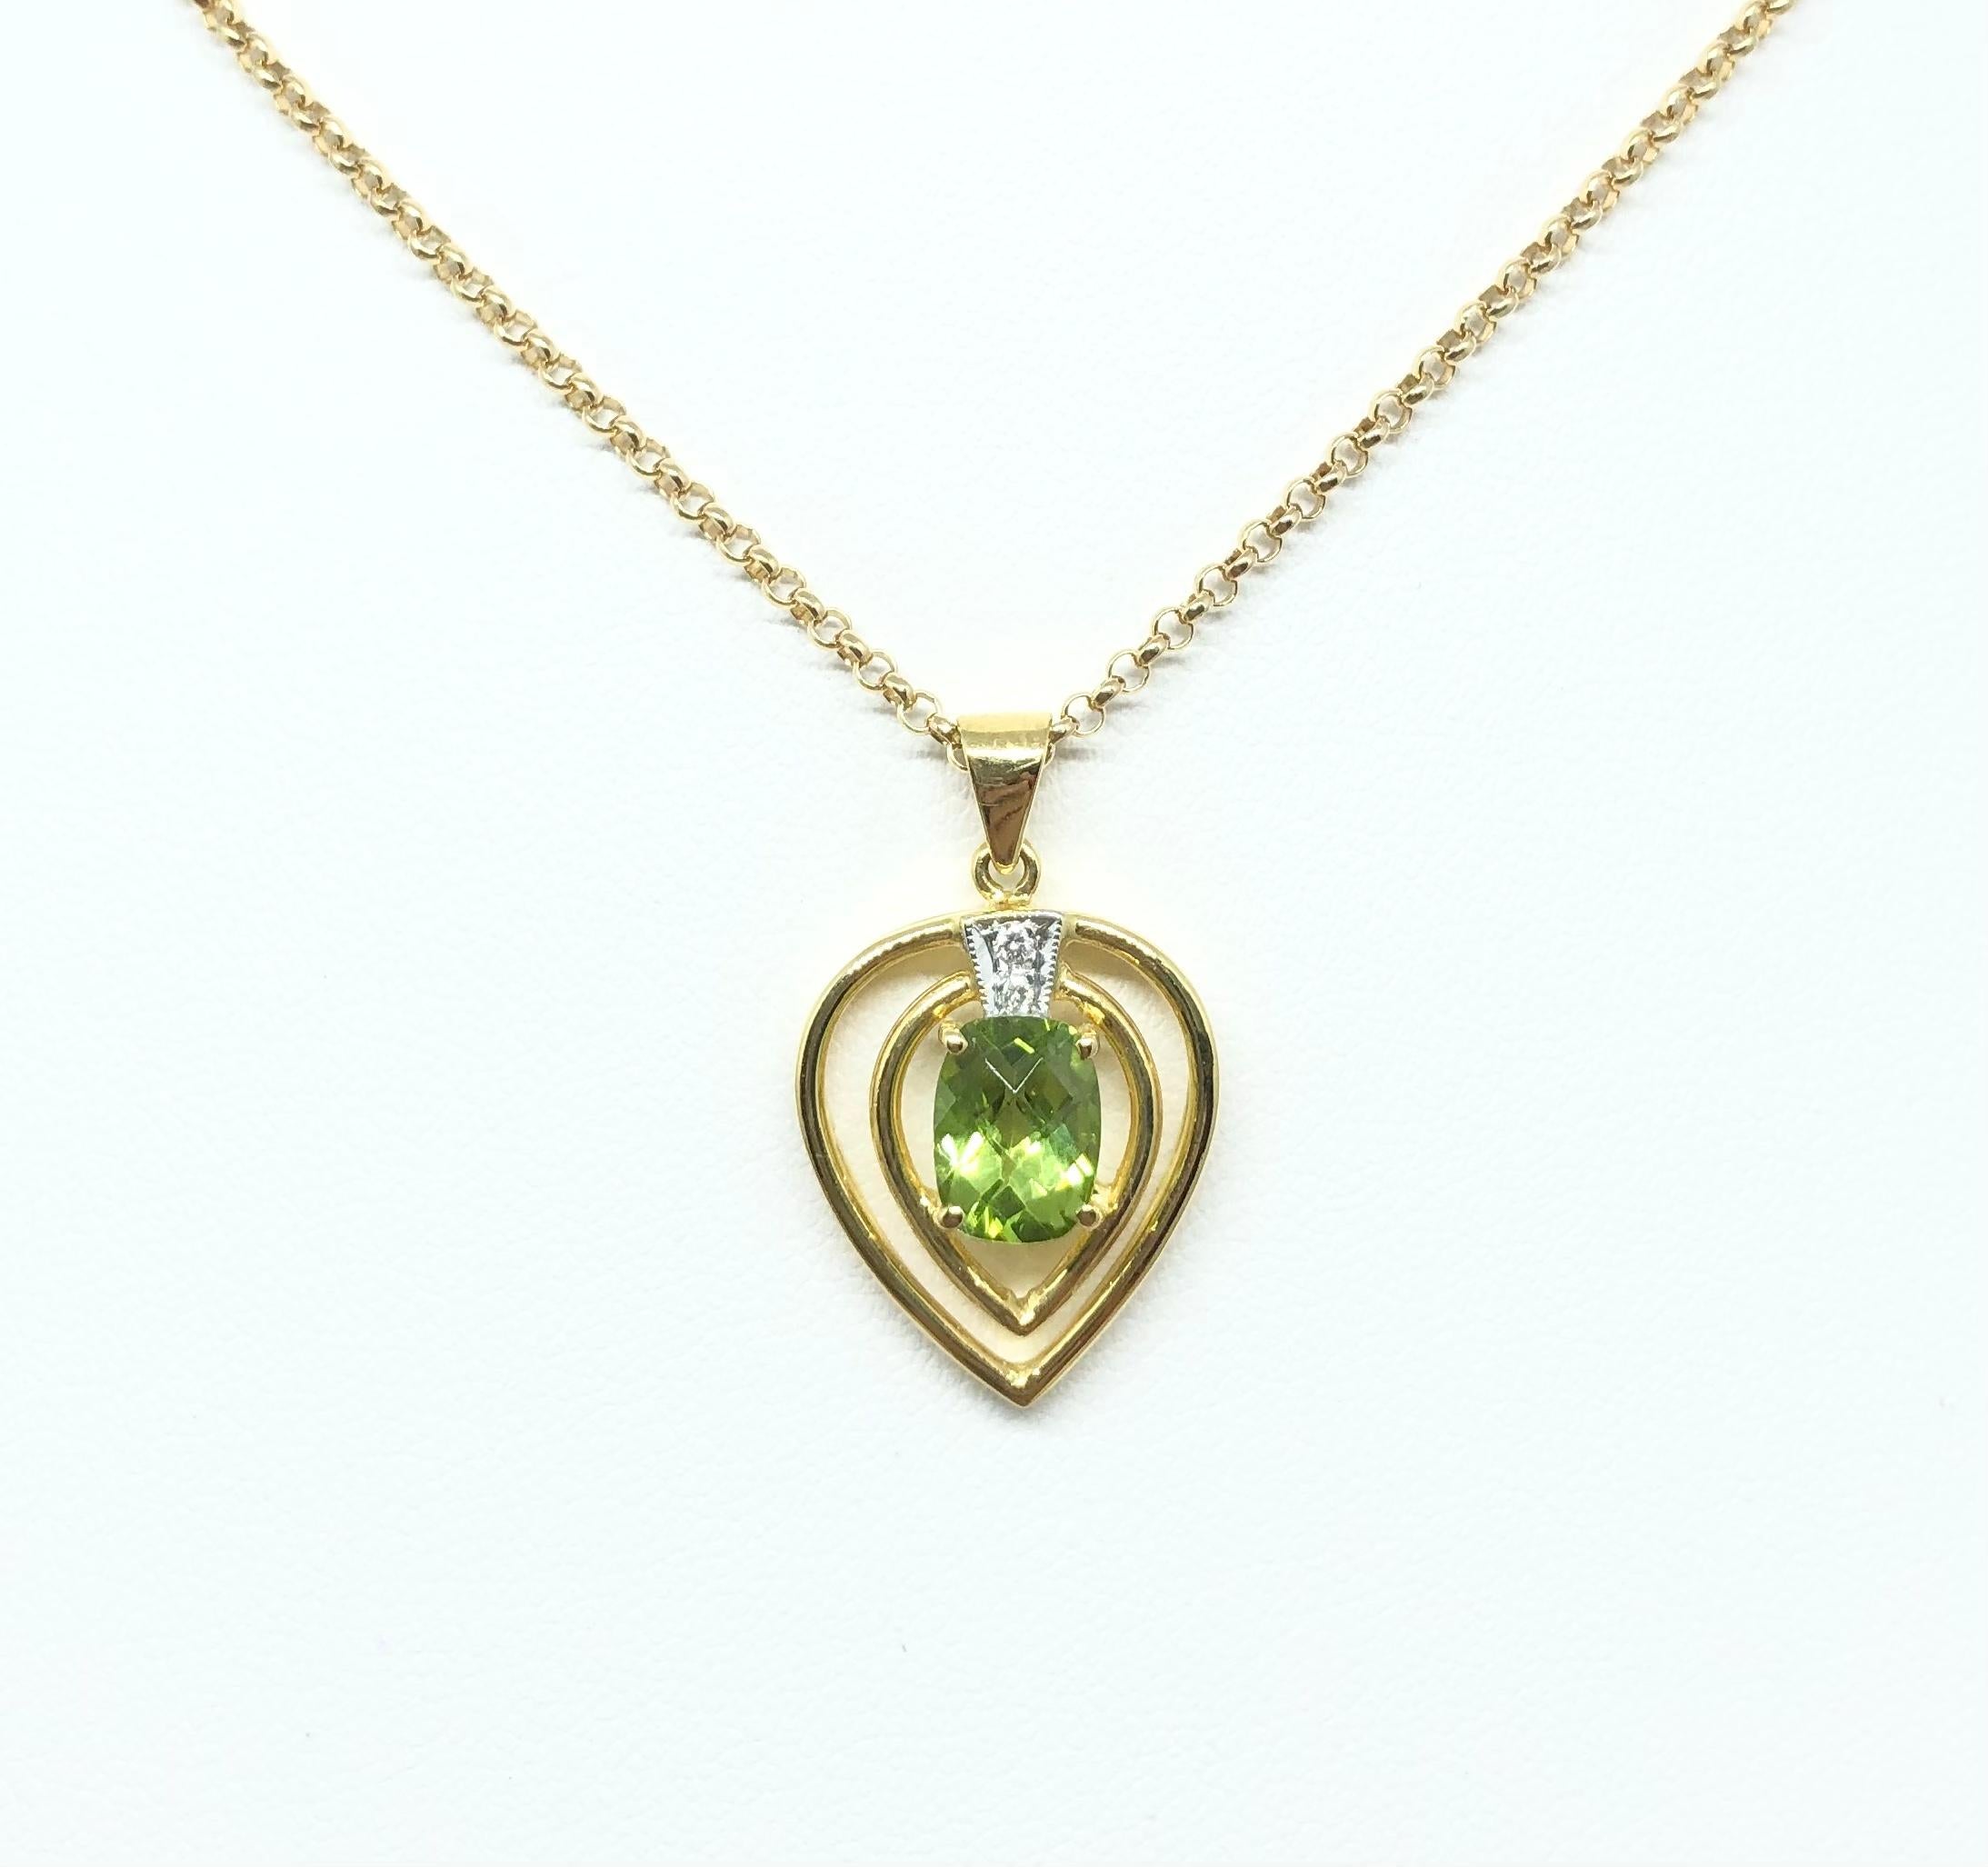 Peridot 1.50 carats with Diamond 0.02 carat Pendant set in 18 Karat Gold Settings
(chain not included)

Width: 1.6 cm 
Length: 2.5 cm
Total Weight: 2.63  grams

